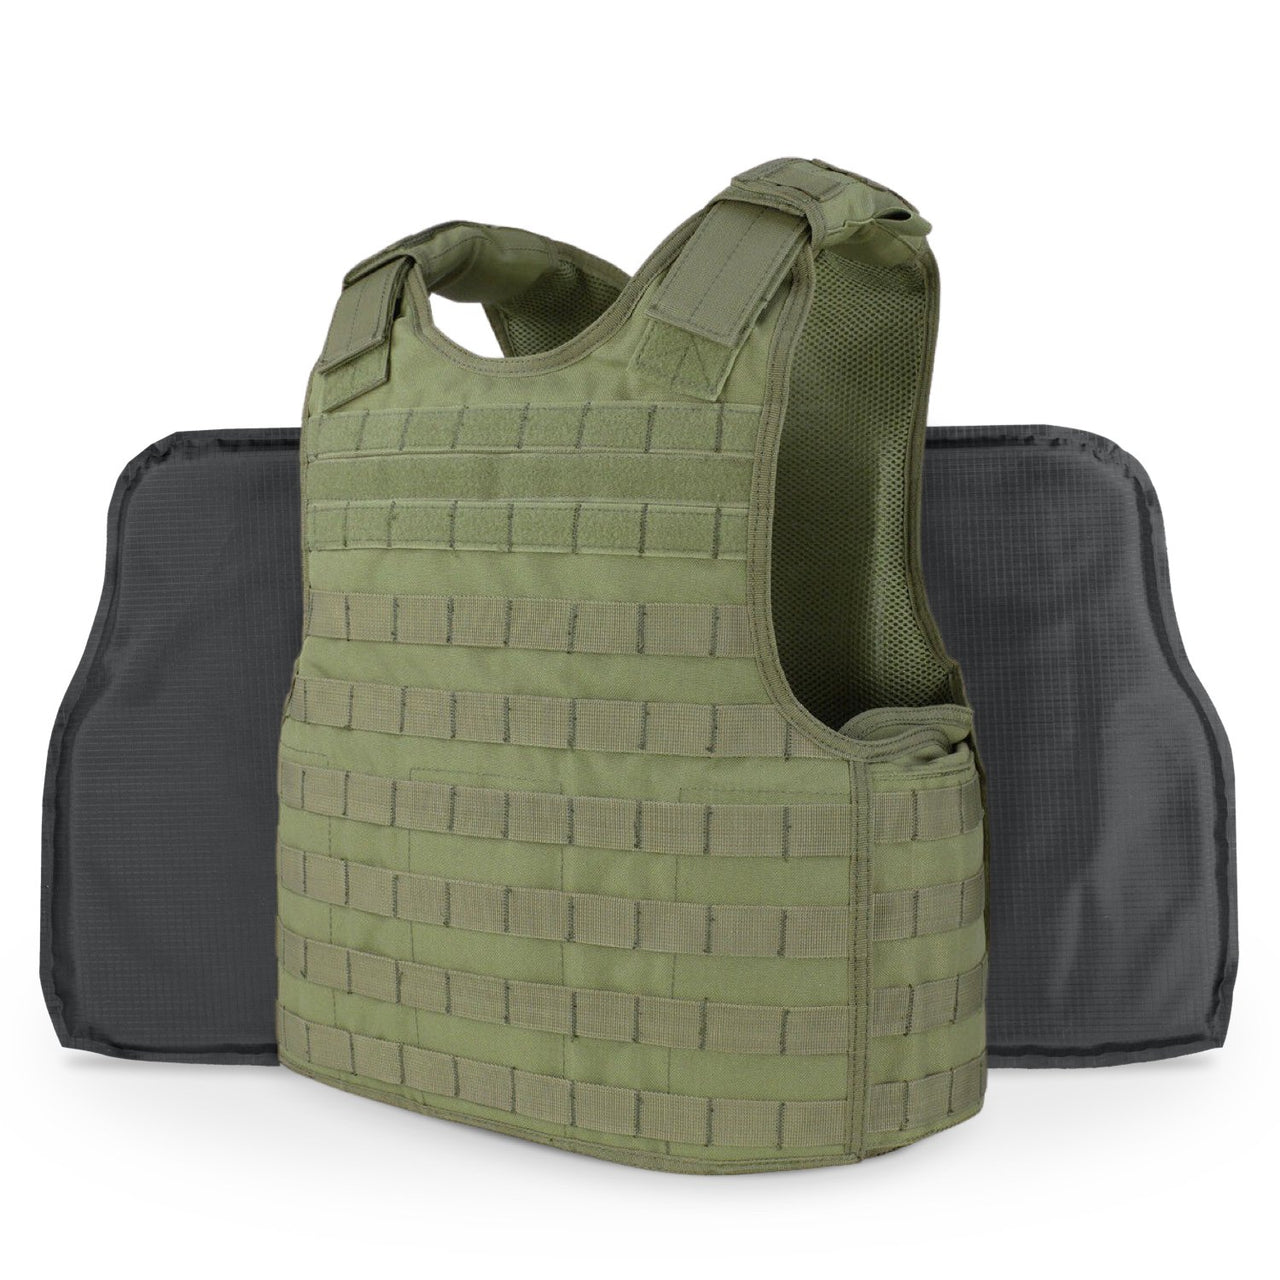 A green Body Armor Direct Defender Tactical Multi-Threat Soft Armor Vest & Plate Carrier in One with a black pouch.